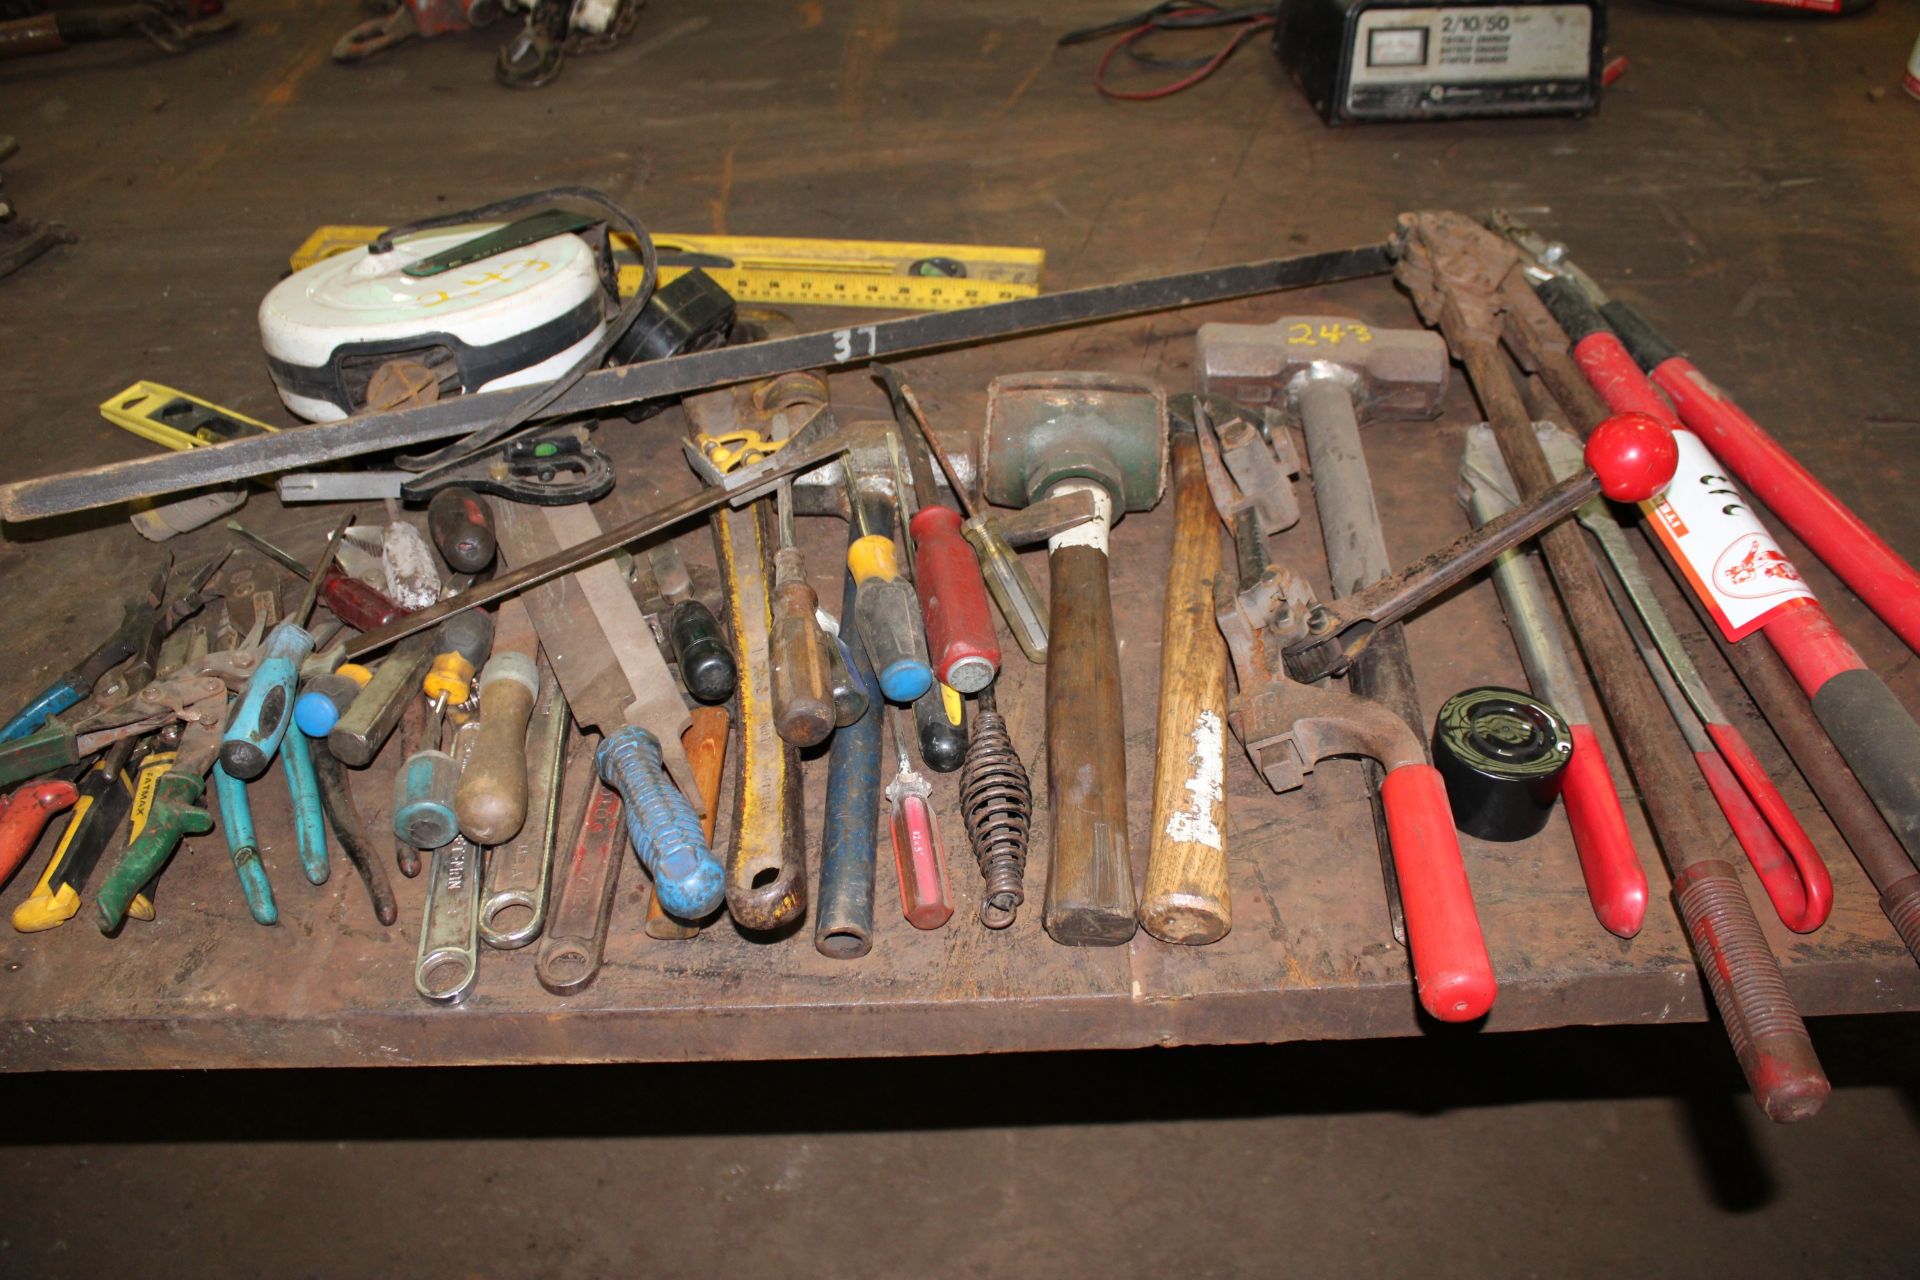 Misc. Hand Tools, Hammer, Files, Screw Drivers, Plyers, Wrenches, Etc